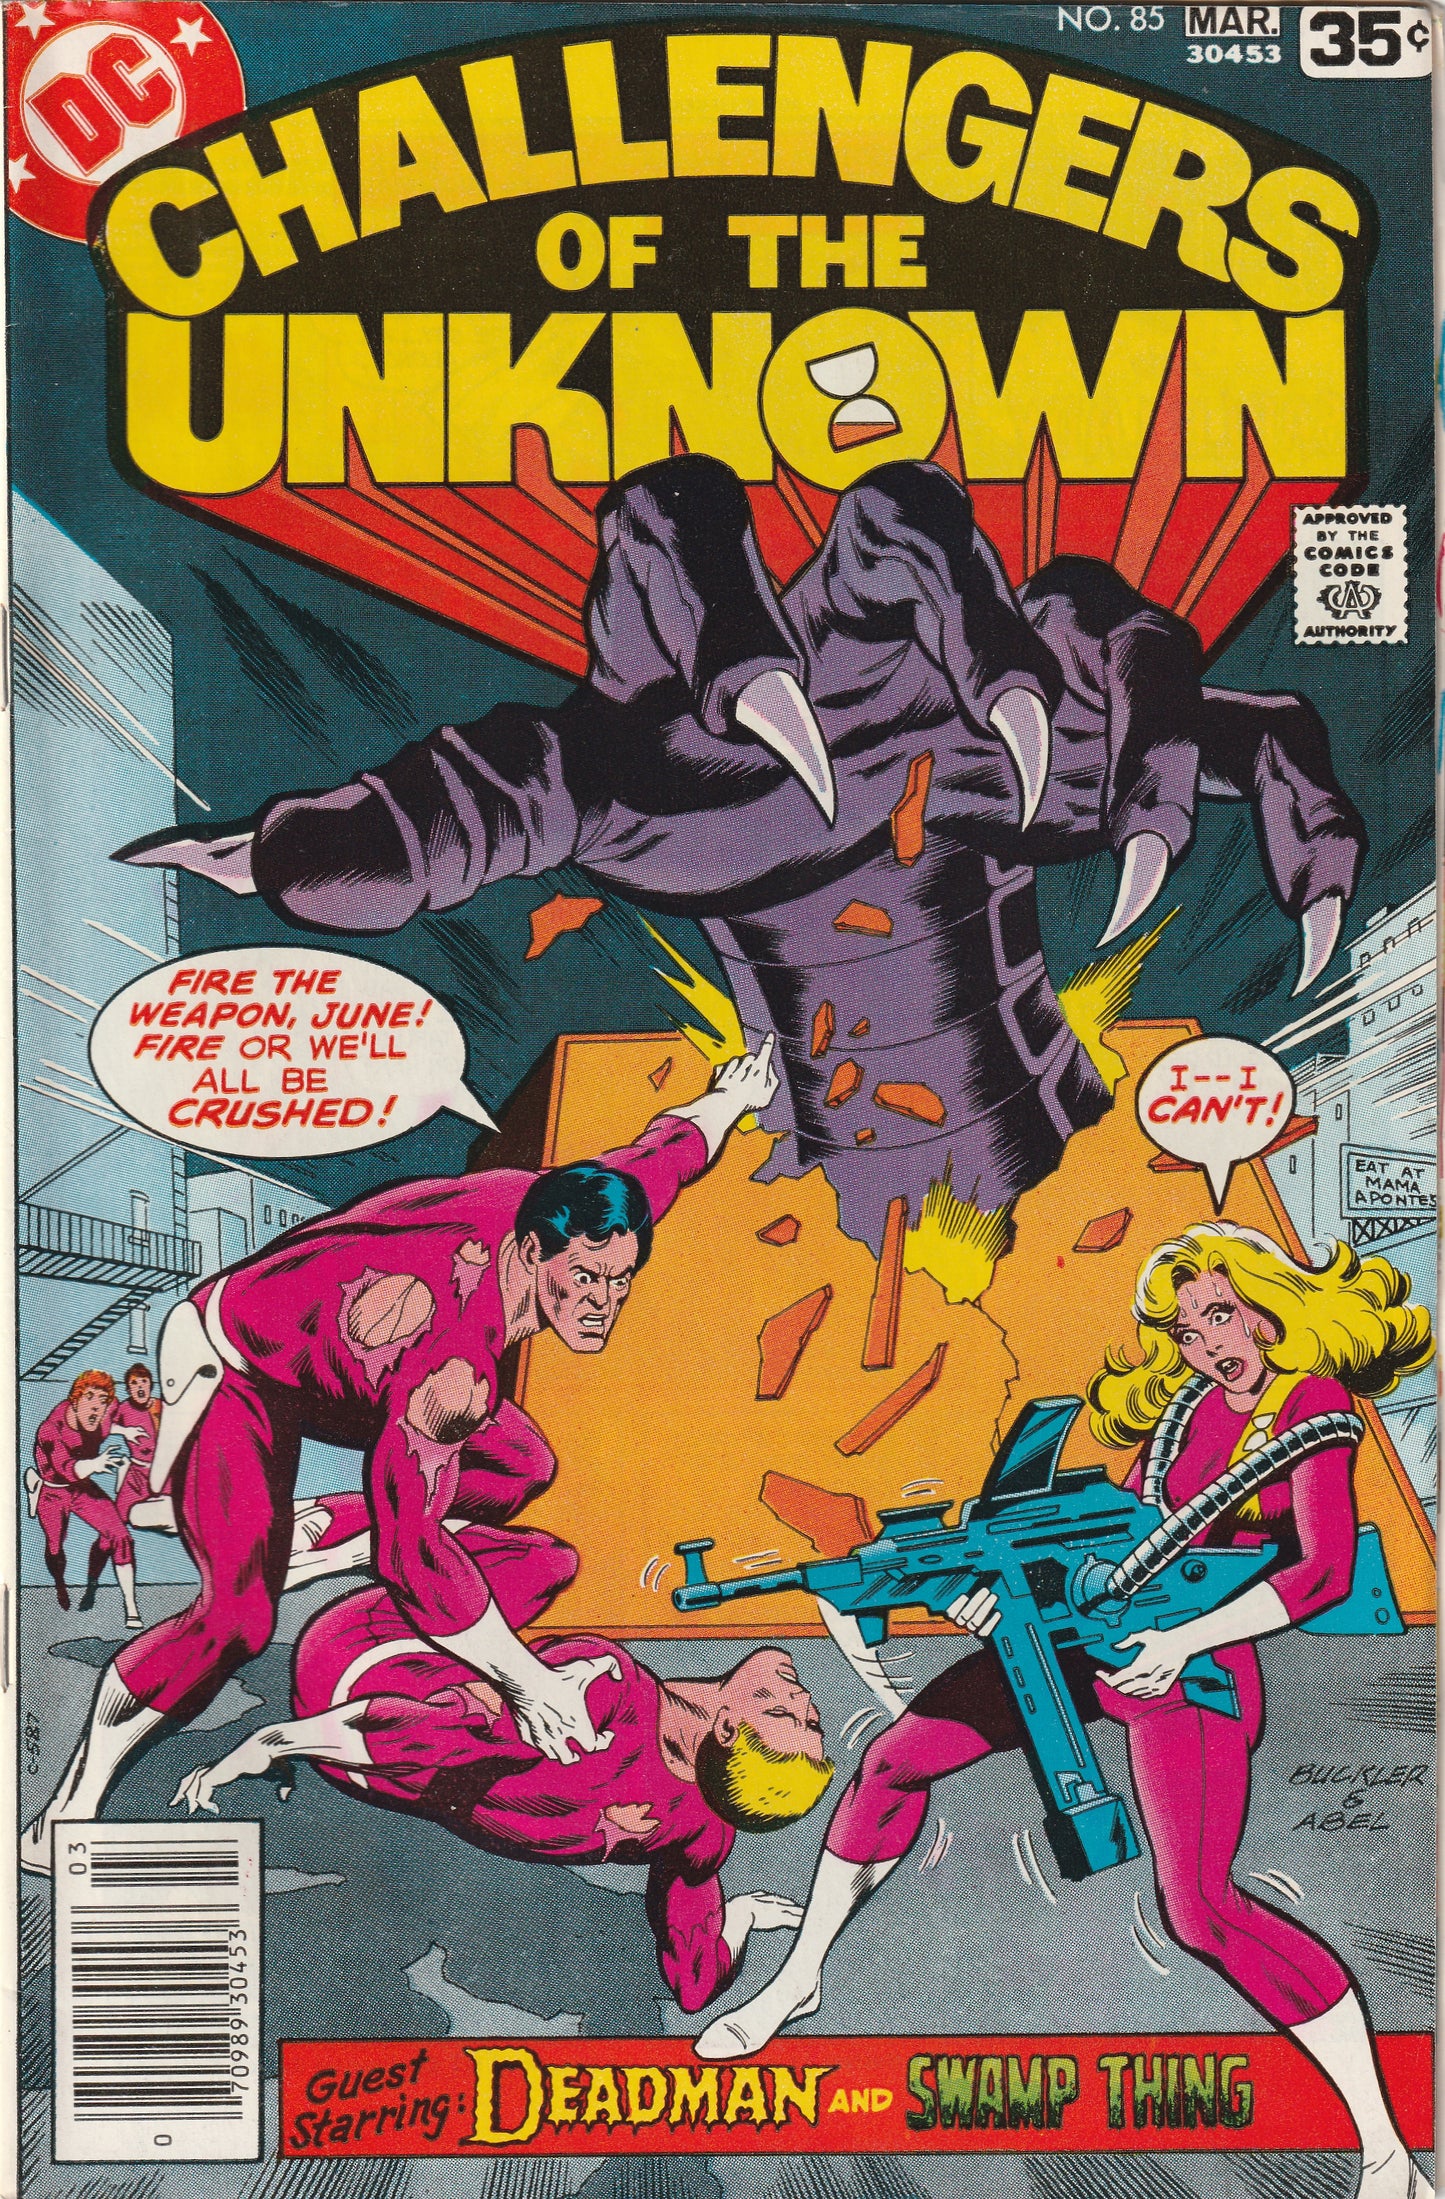 Challengers of the Unknown #85 (1978) - Deadman & Swamp Thing appearance